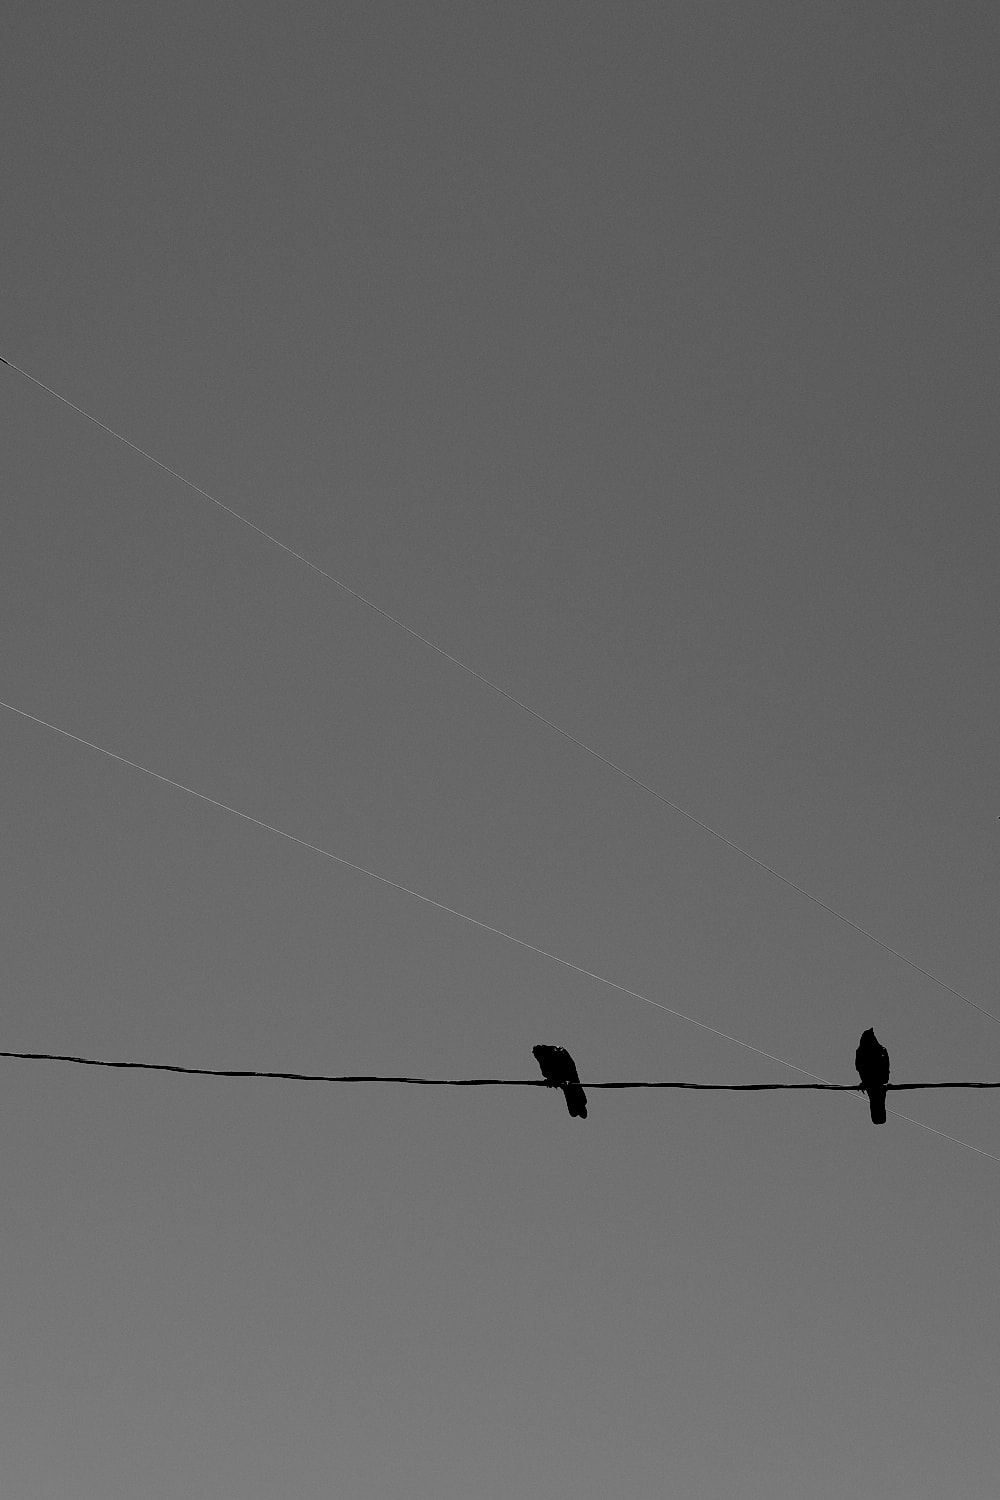 Black and white portrait photo of two crows sitting on a telephone line.